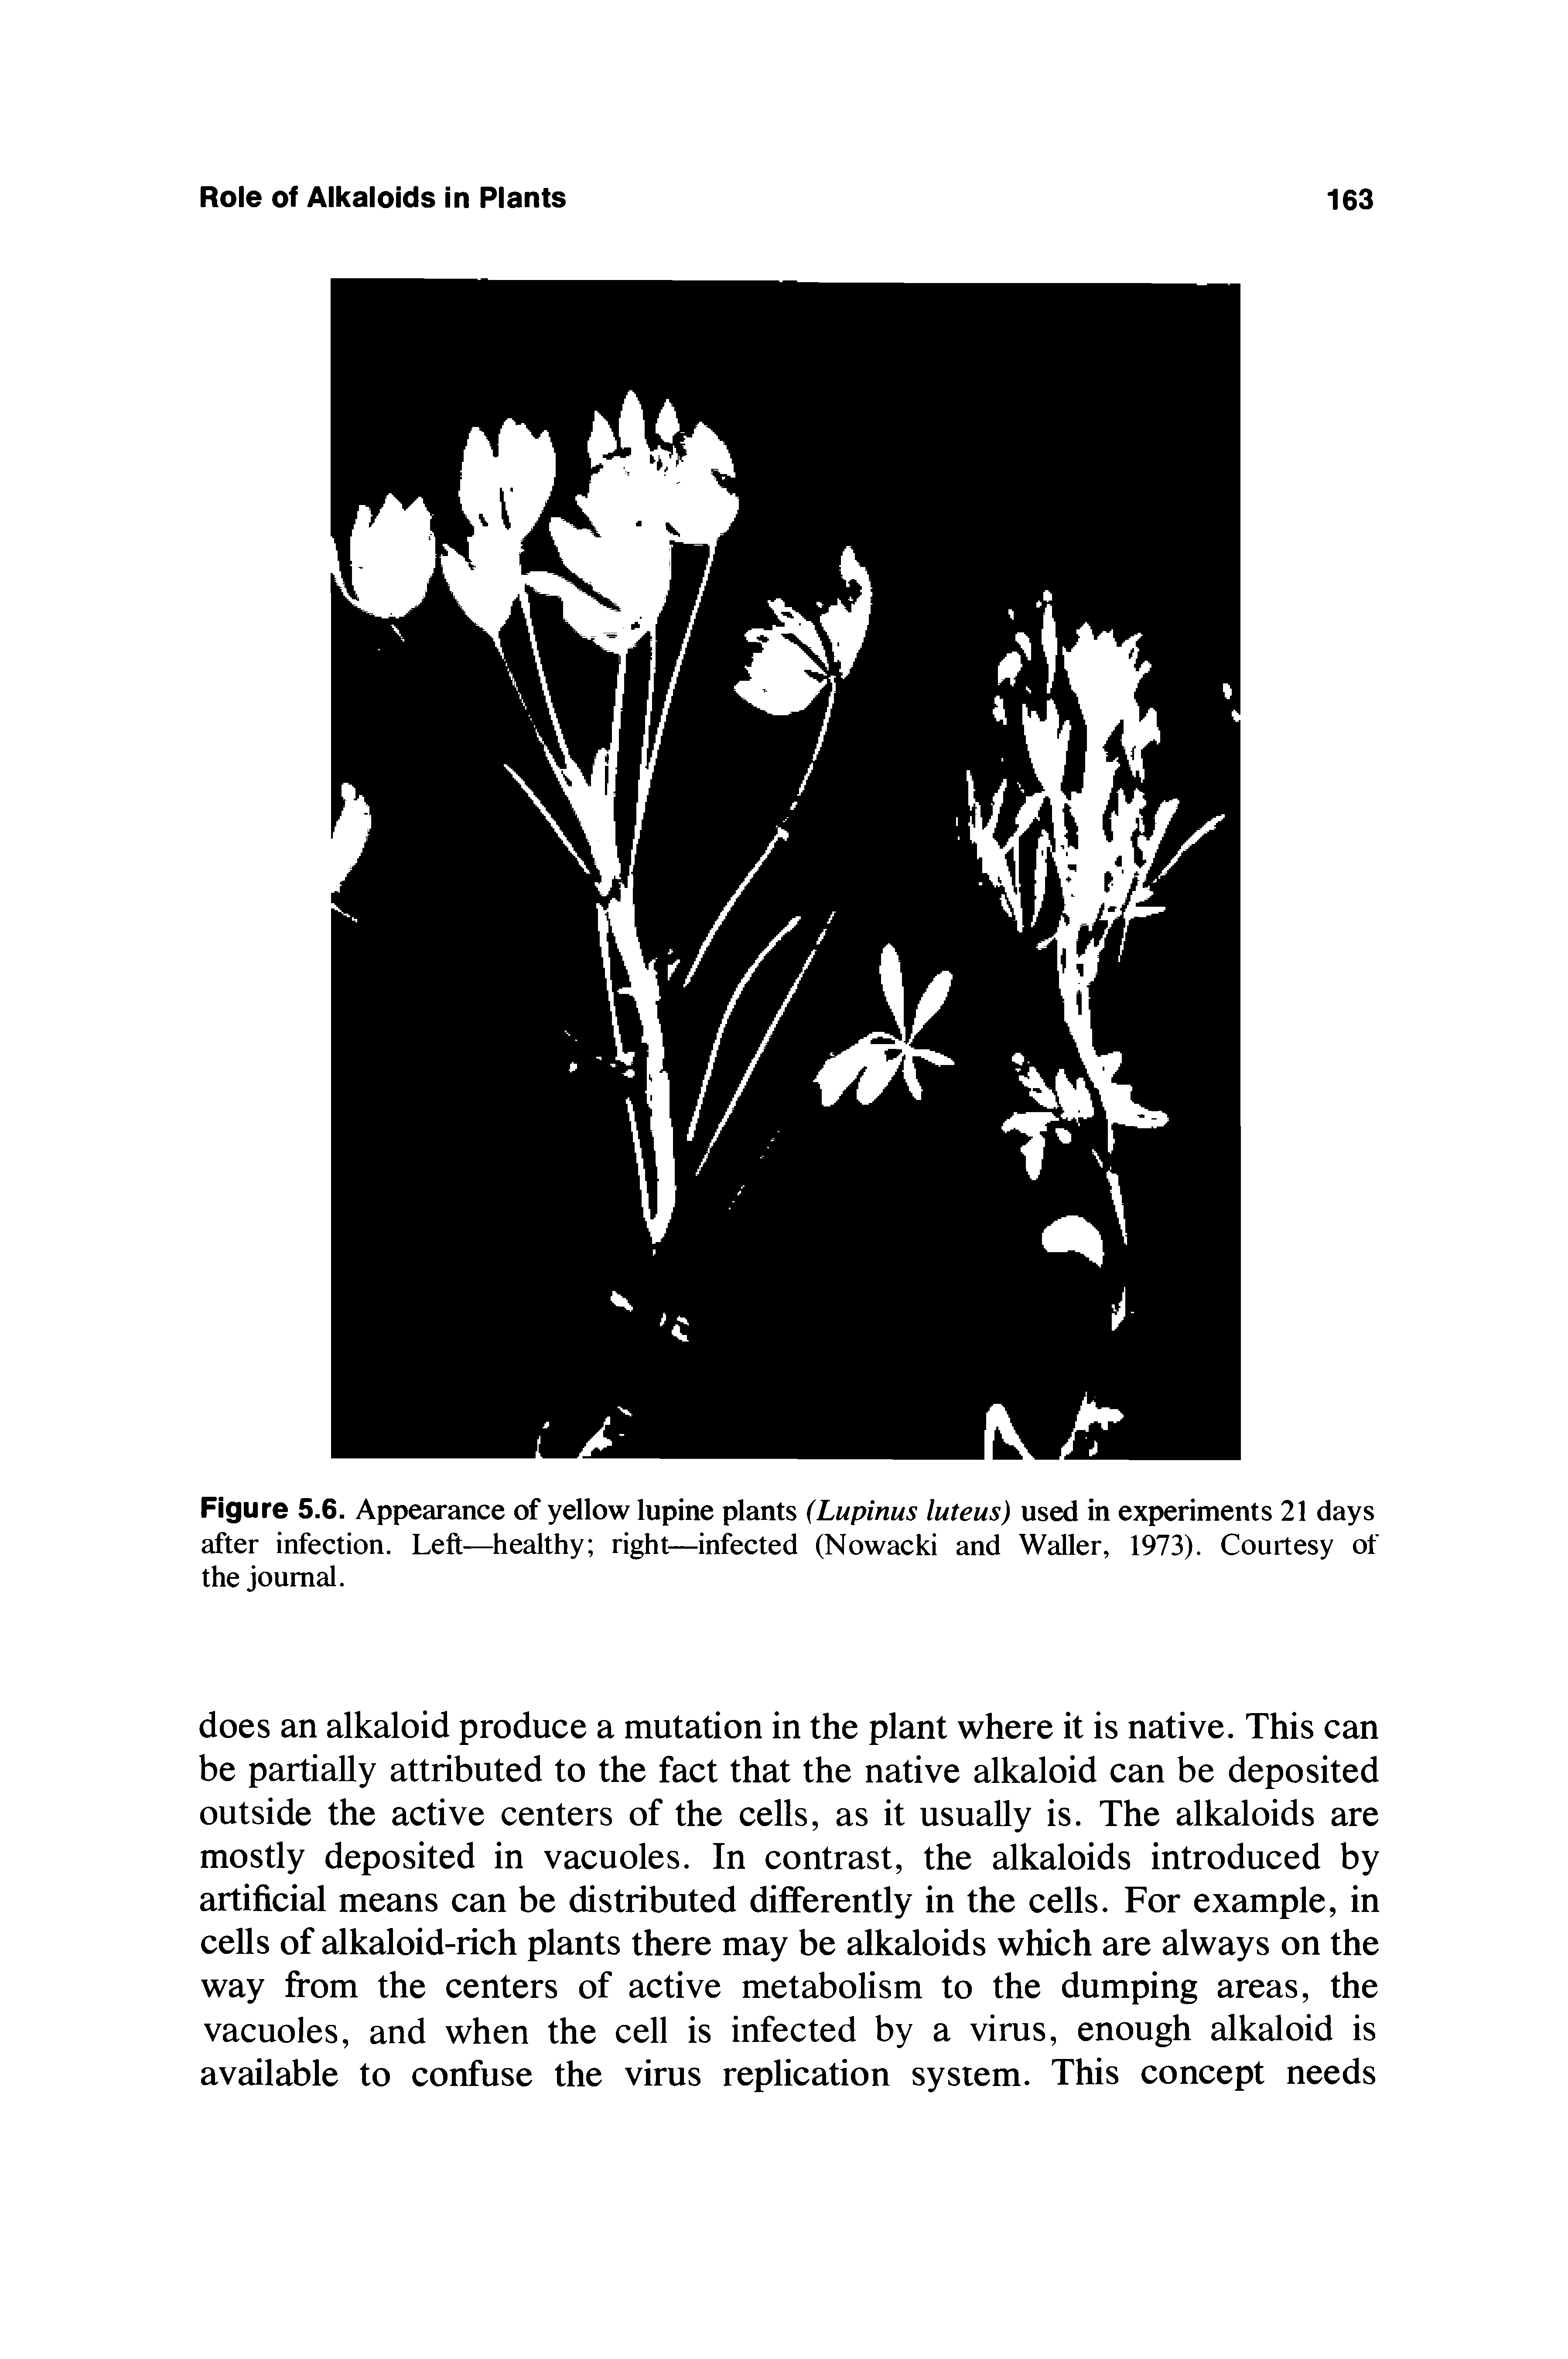 Figure 5.6. Appearance of yellow lupine plants (Lupinus luteus) used in experiments 21 days after infection. Left— healthy right—infected (Nowacki and Waller, 1973). Courtesy of the journal.